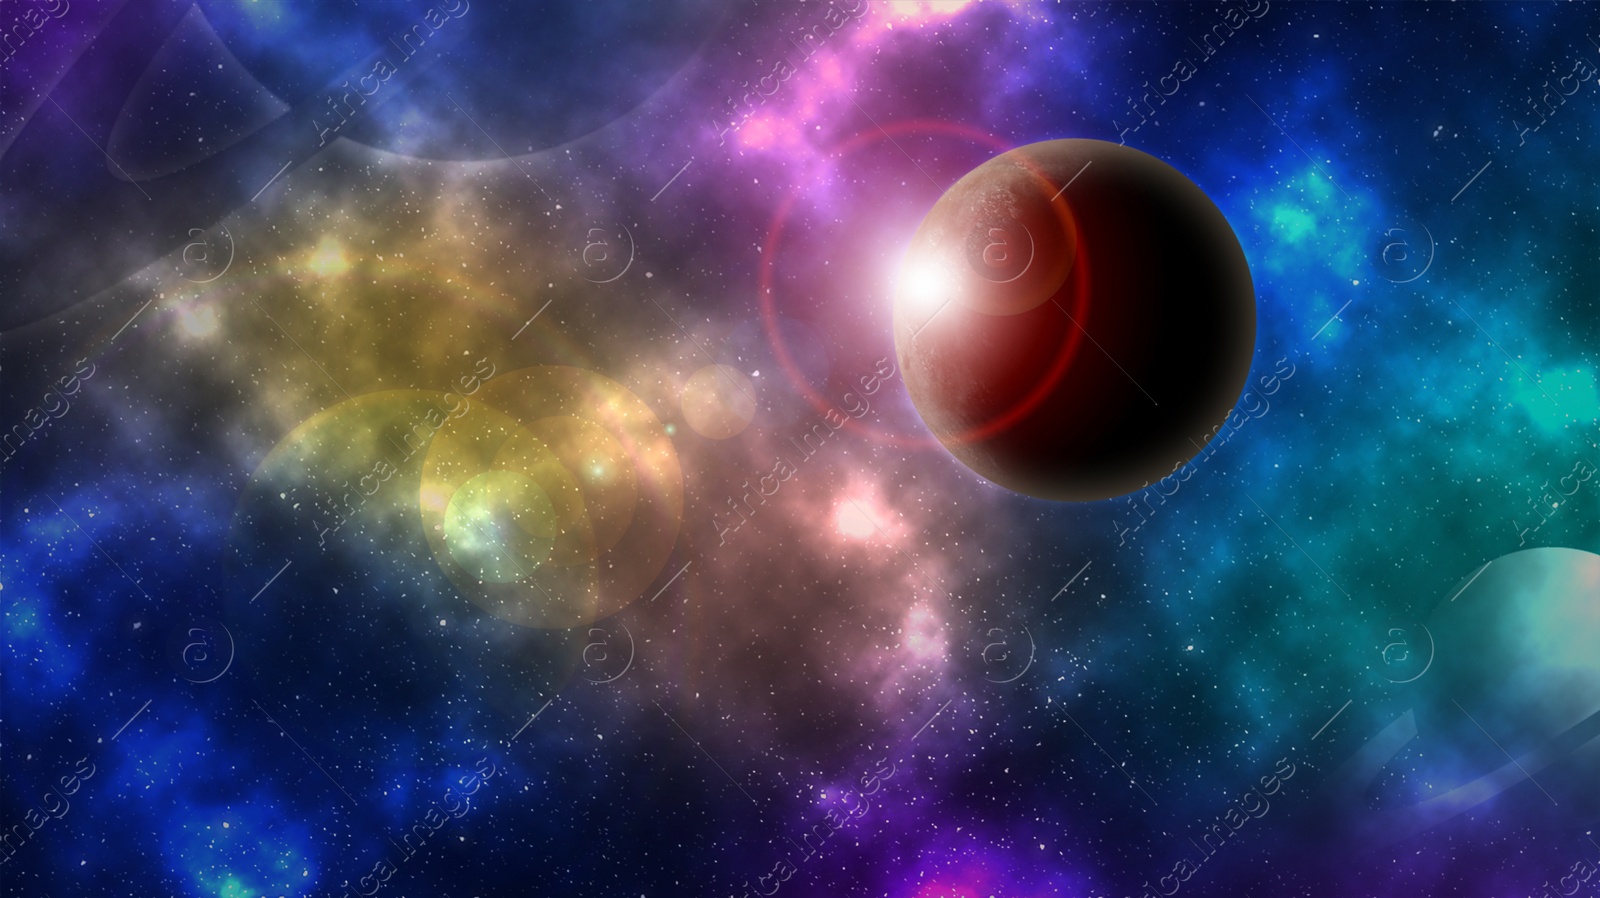 Image of Amazing illustration of galaxy with stars and planets, banner design. Fantasy world